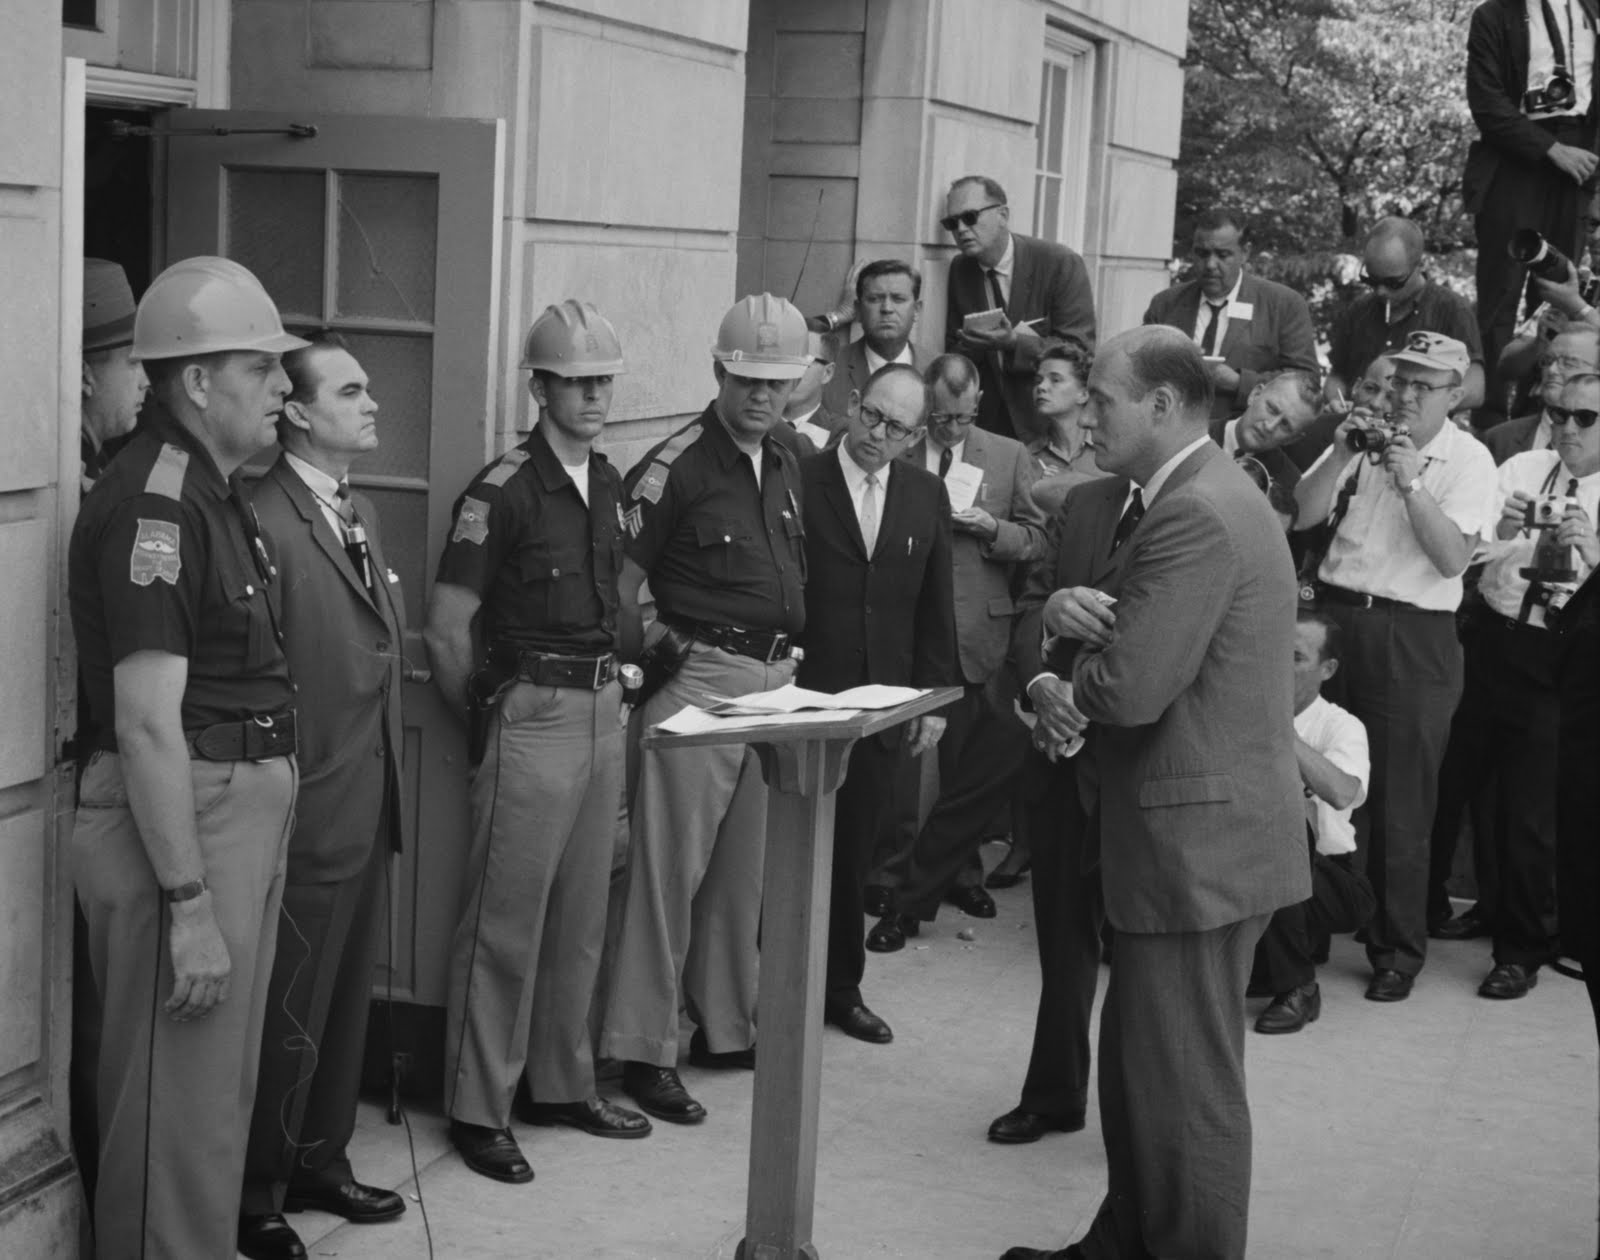 Governor_George_Wallace_stands_defiant_at_the_University_of_Alabama.jpg